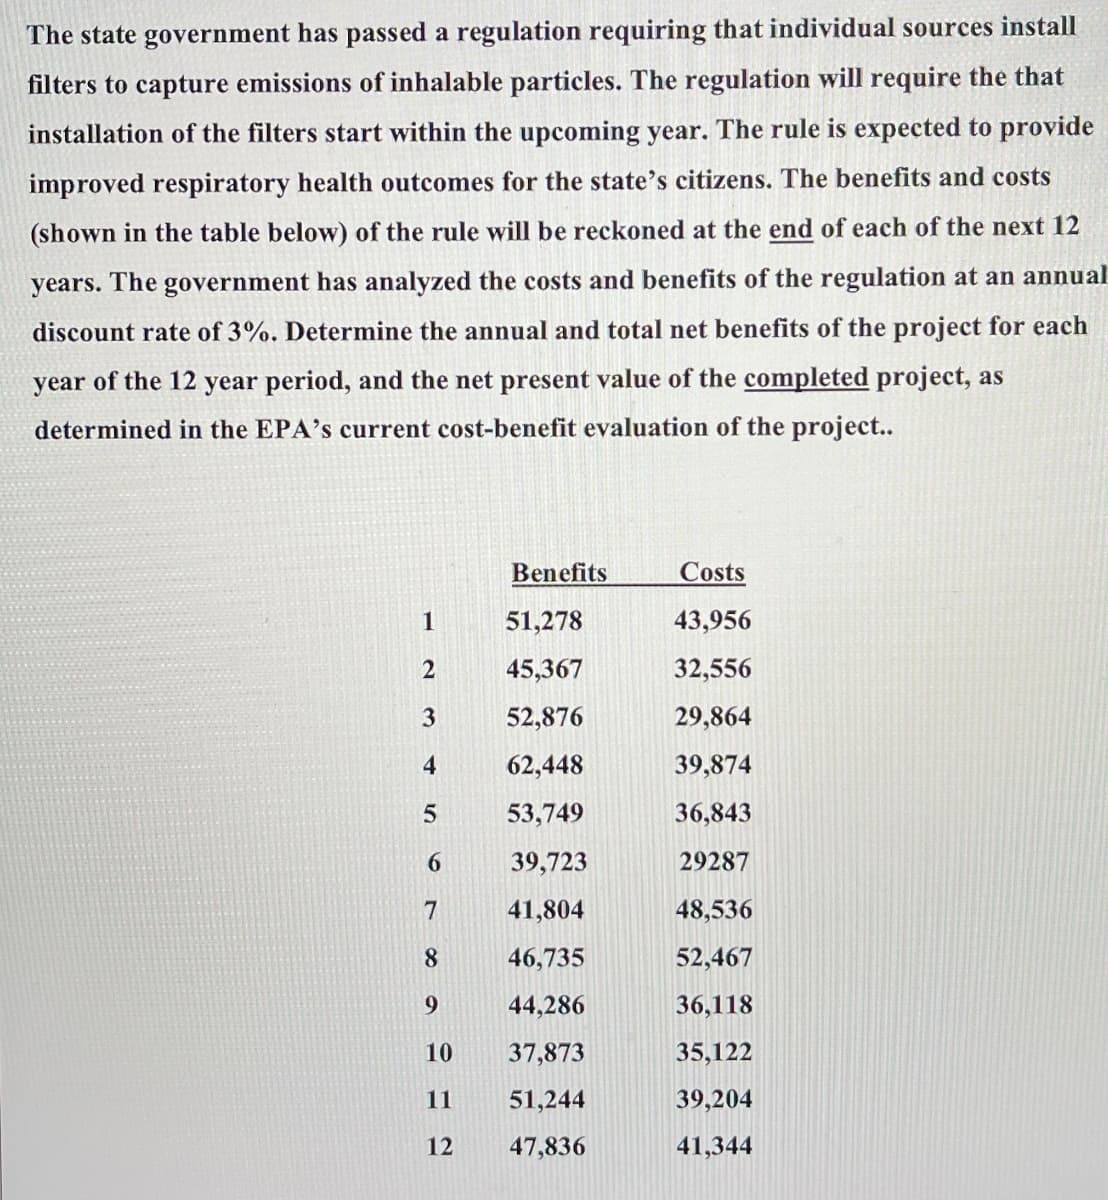 The state government has passed a regulation requiring that individual sources install
filters to capture emissions of inhalable particles. The regulation will require the that
installation of the filters start within the upcoming year. The rule is expected to provide
improved respiratory health outcomes for the state's citizens. The benefits and costs
(shown in the table below) of the rule will be reckoned at the end of each of the next 12
years. The government has analyzed the costs and benefits of the regulation at an annual
discount rate of 3%. Determine the annual and total net benefits of the project for each
year of the 12 year period, and the net present value of the completed project, as
determined in the EPA's current cost-benefit evaluation of the project..
1
2
3
4
5
6
7
8
9
10
11
12
Benefits
51,278
45,367
52,876
62,448
53,749
39,723
41,804
46,735
44,286
37,873
51,244
47,836
Costs
43,956
32,556
29,864
39,874
36,843
29287
48,536
52,467
36,118
35,122
39,204
41,344